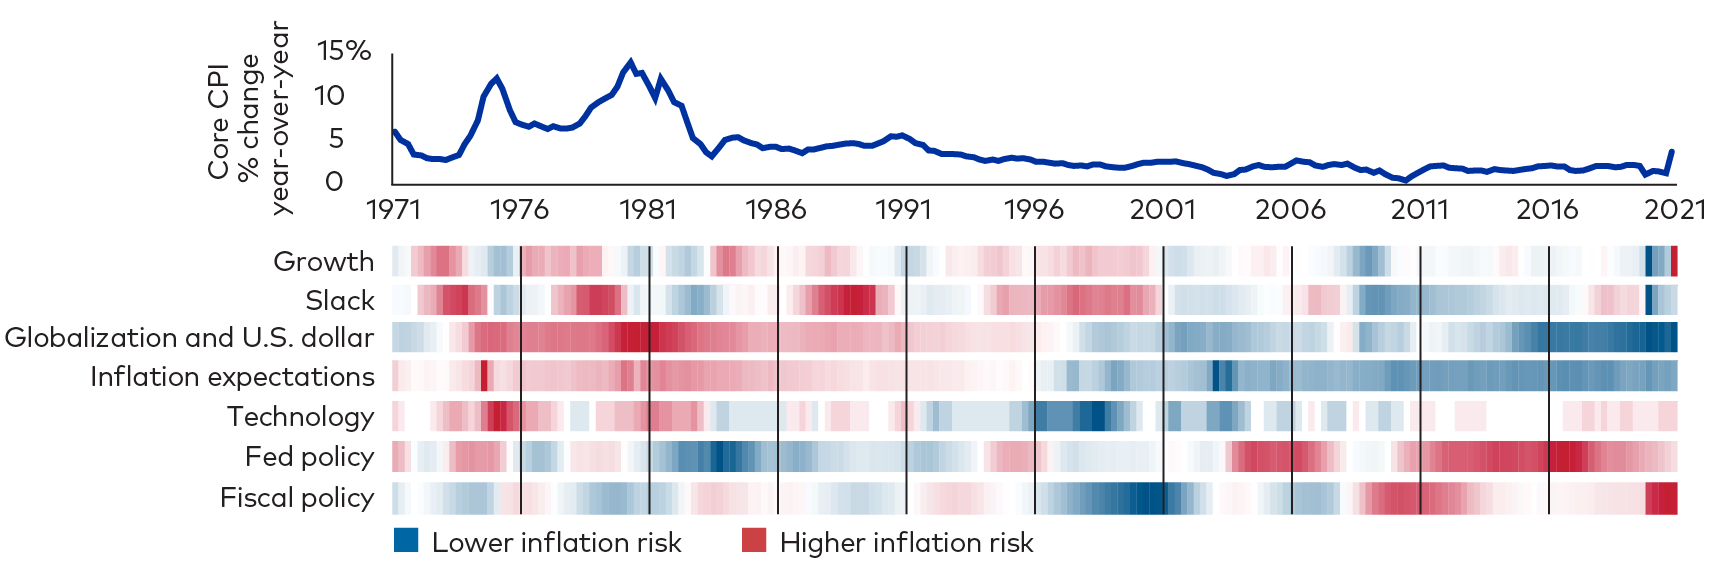 A line graph shows the core U.S. Consumer Price Index from June 1971 through June 2021. That measure was relatively high from the mid-1970s through the early 1980s, and it moved up from low levels starting in late 2020. Below the line graph is a heat map for the same period that plots drivers of inflation: growth, slack, globalization and U.S. dollar, inflation expectations, technology, Federal Reserve policy, and fiscal policy. Each driver is represented by colored bands that change to red if the driver has inflationary impact and to blue if the driver has deflationary impact. In 2021, fiscal policy, Fed policy, and growth are red, indicating a higher inflation risk. Inflation expectations and slack are blue, indicating a lower inflation risk.